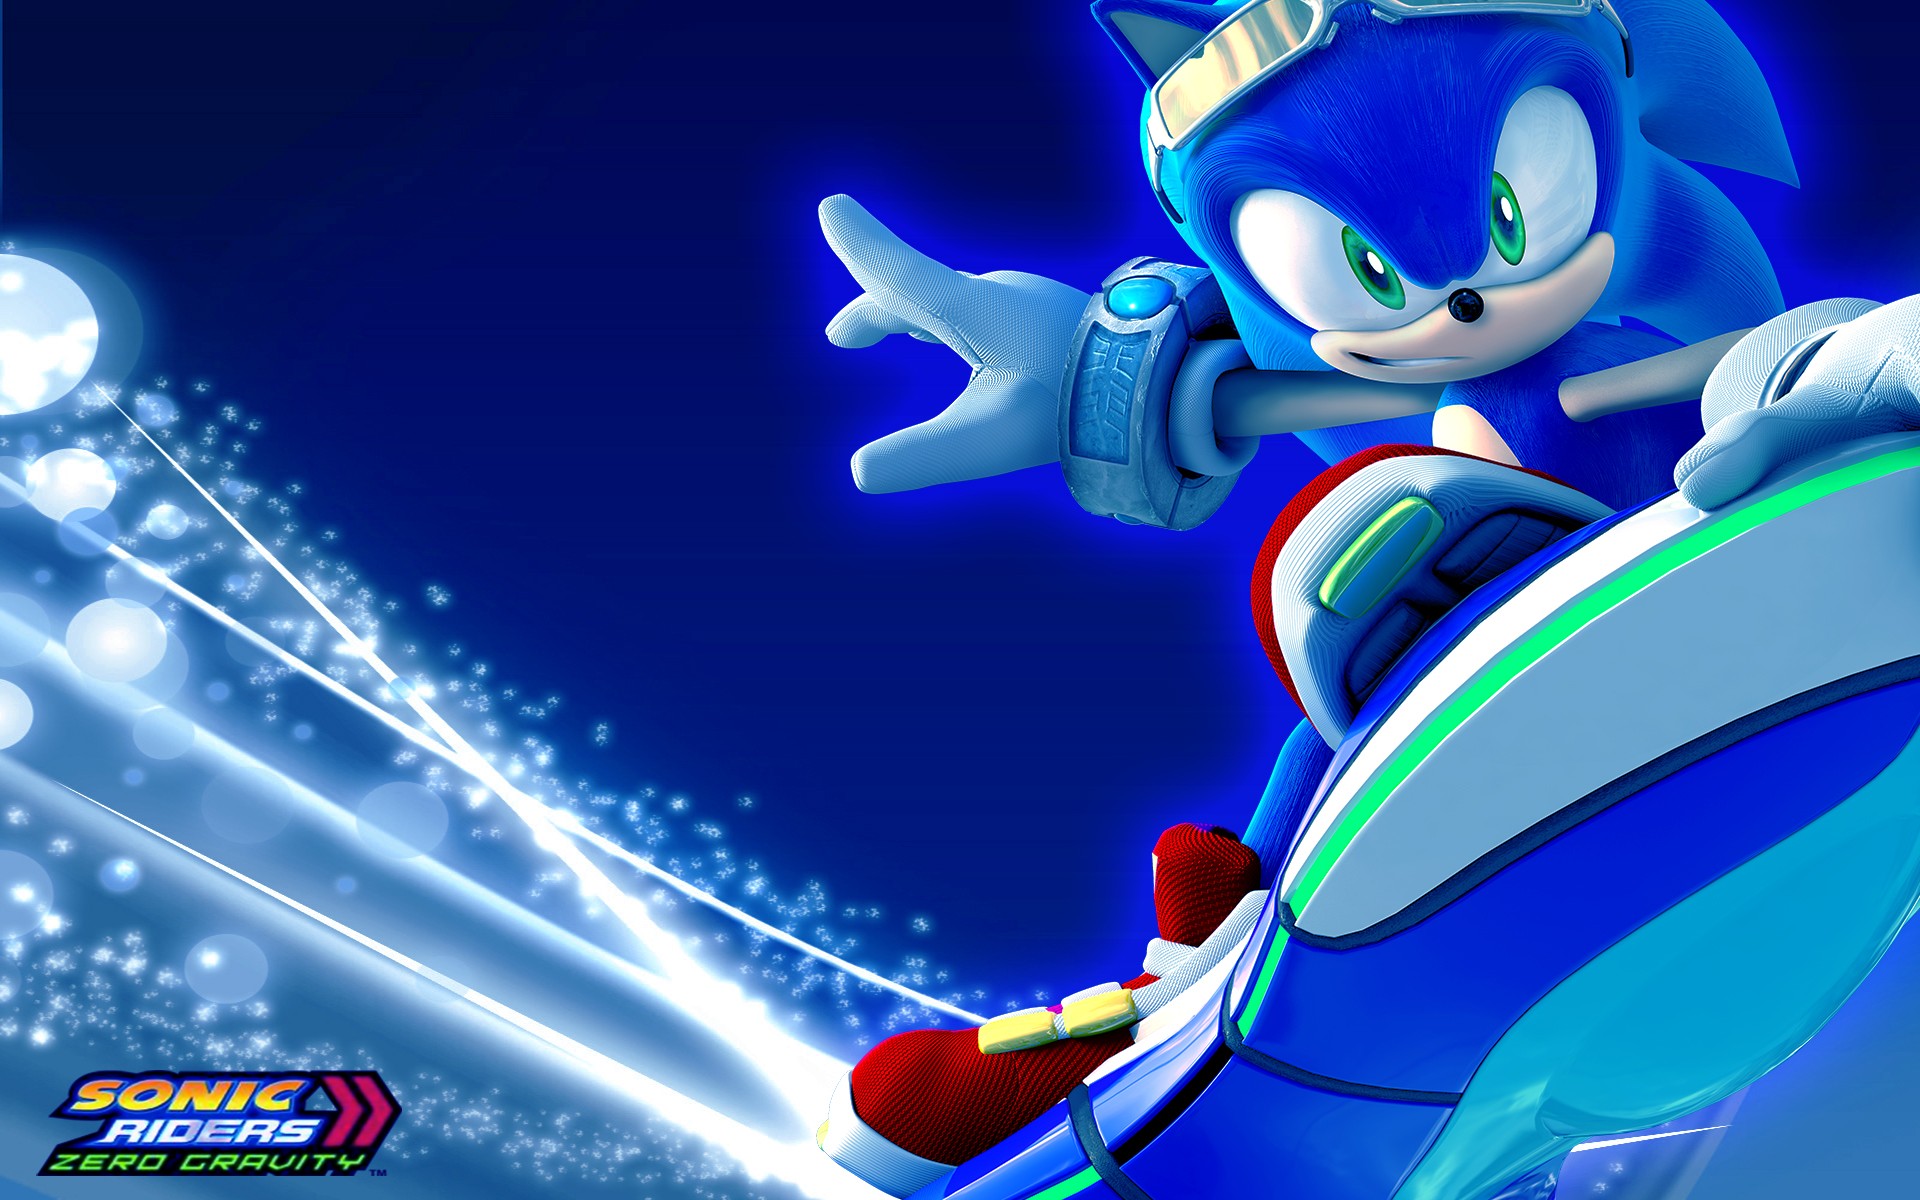 Sonic Riders Zero Gravity Sonic The Hedgehog Wallpapers Hd Desktop And Mobile Backgrounds